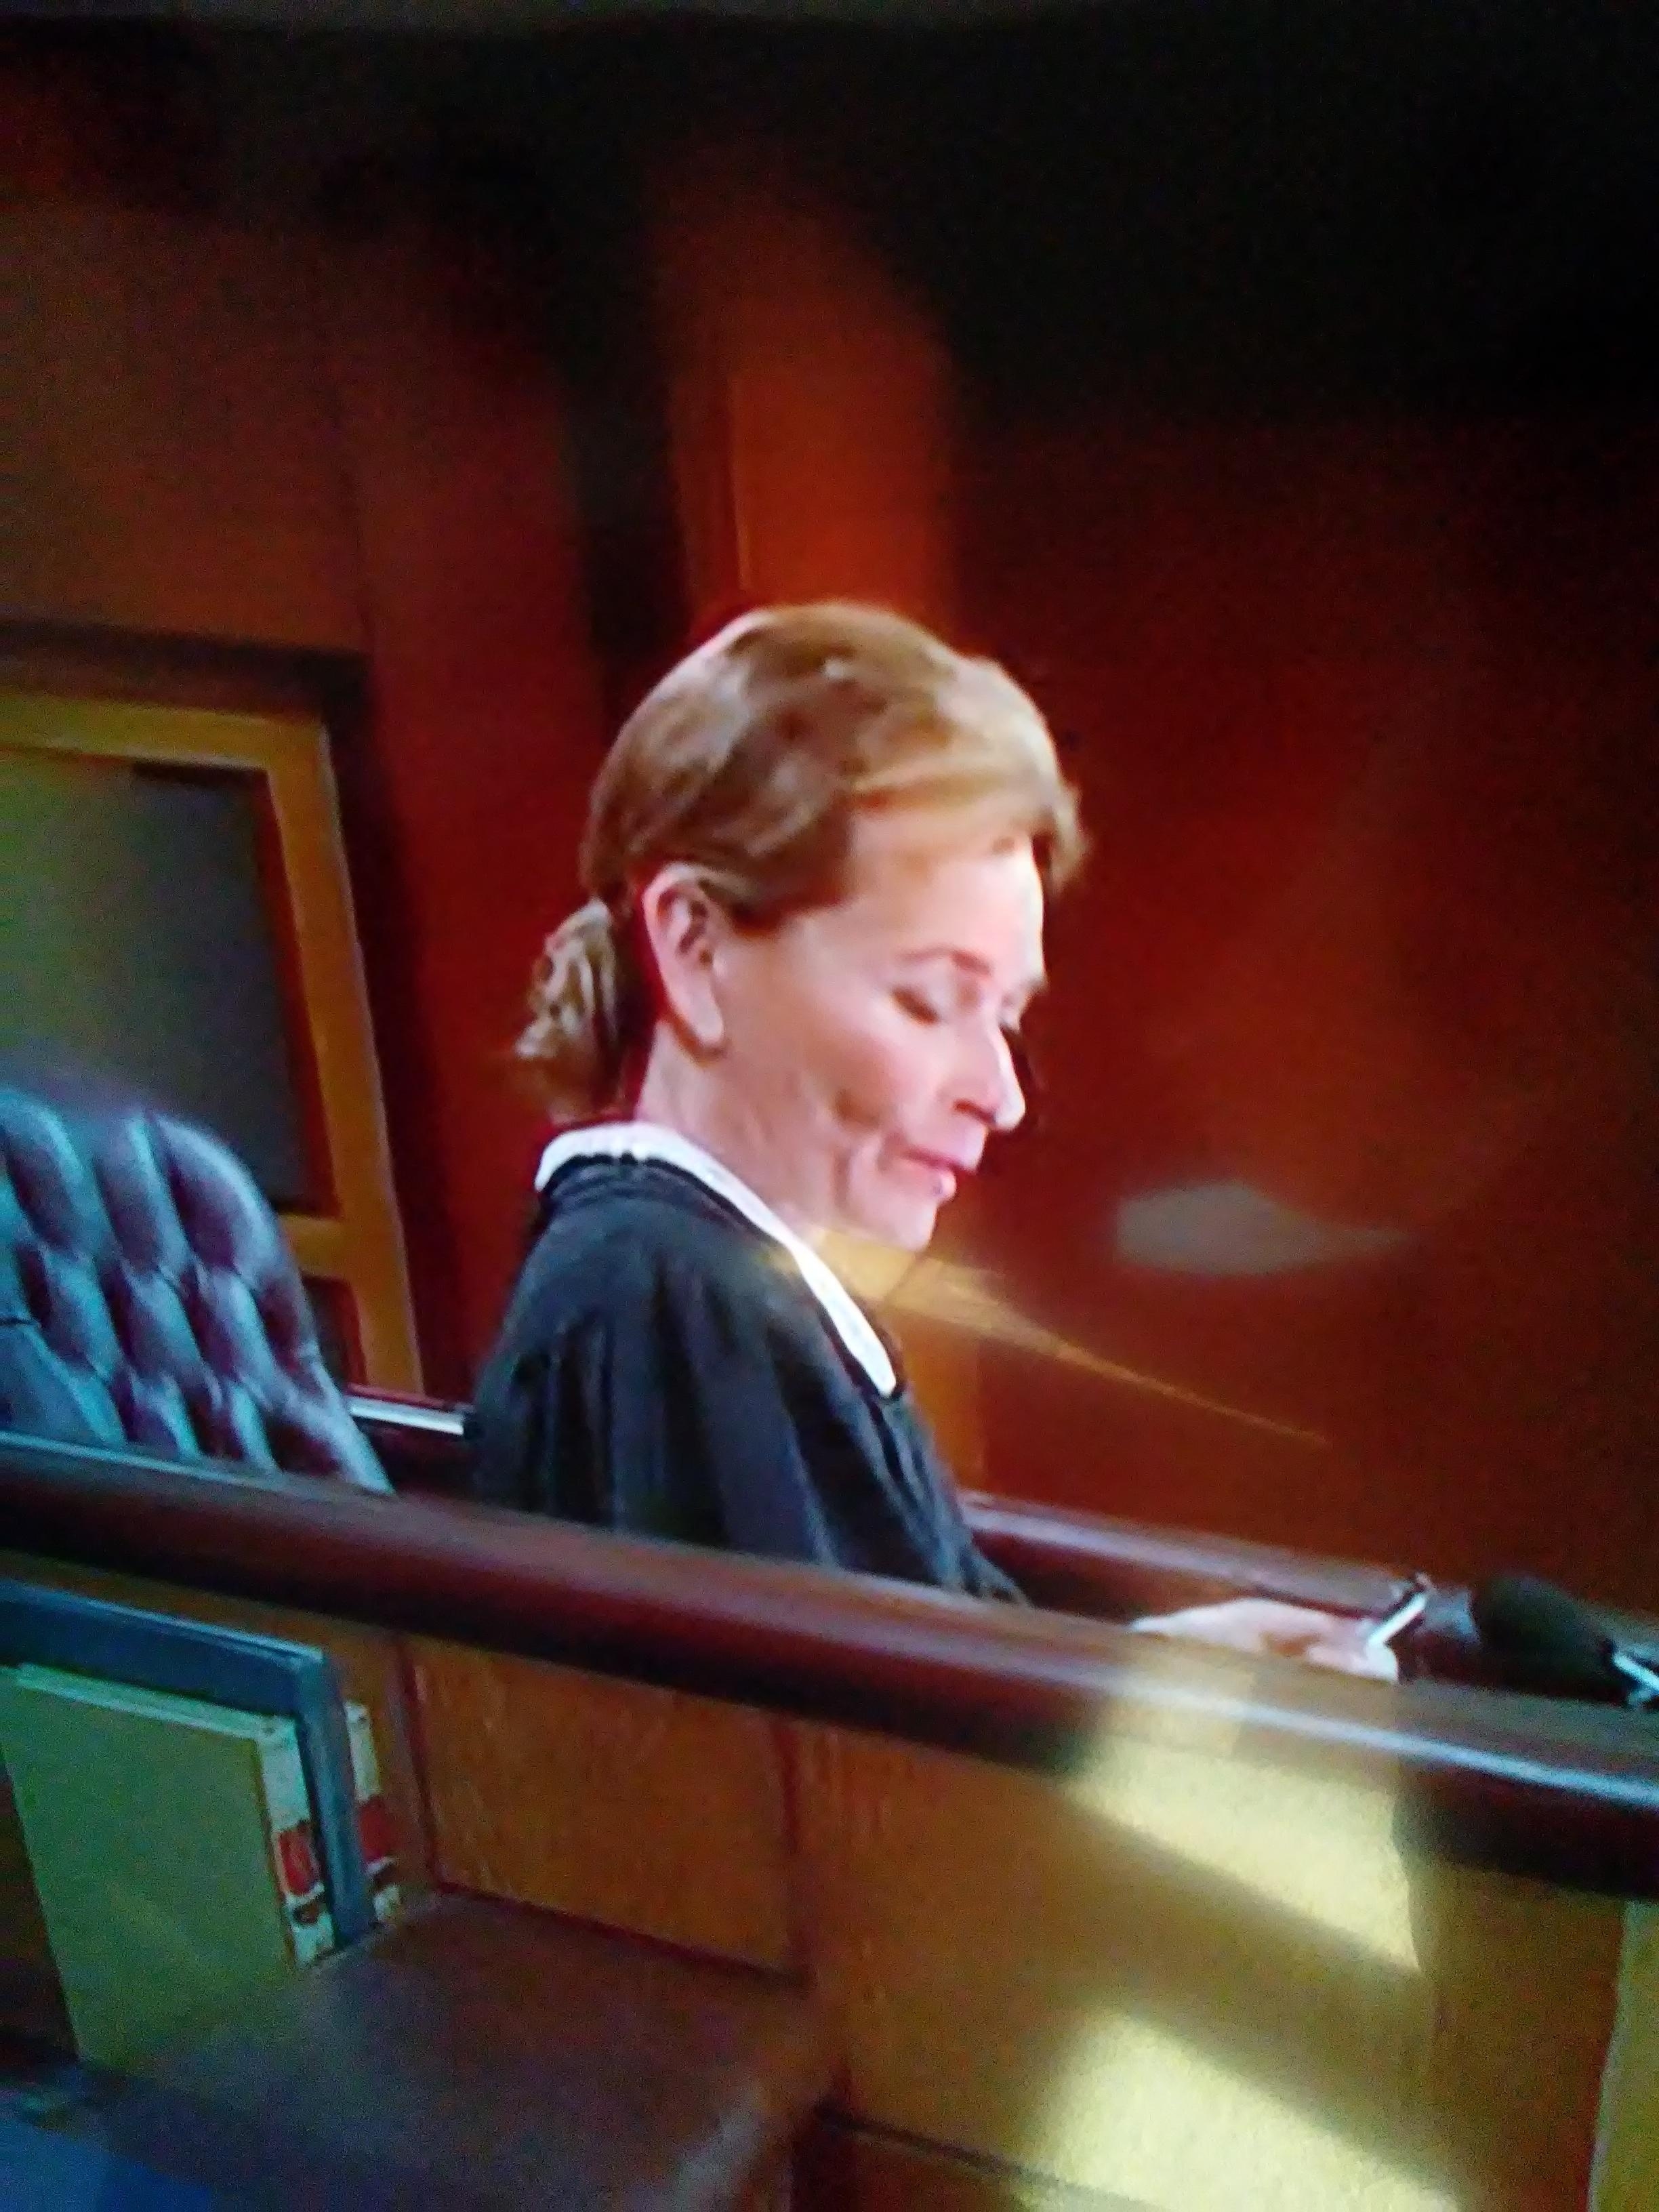 What Happened To The Iconic Hair? What Is This Ponytail intended for Judge Judy With Longer Hair